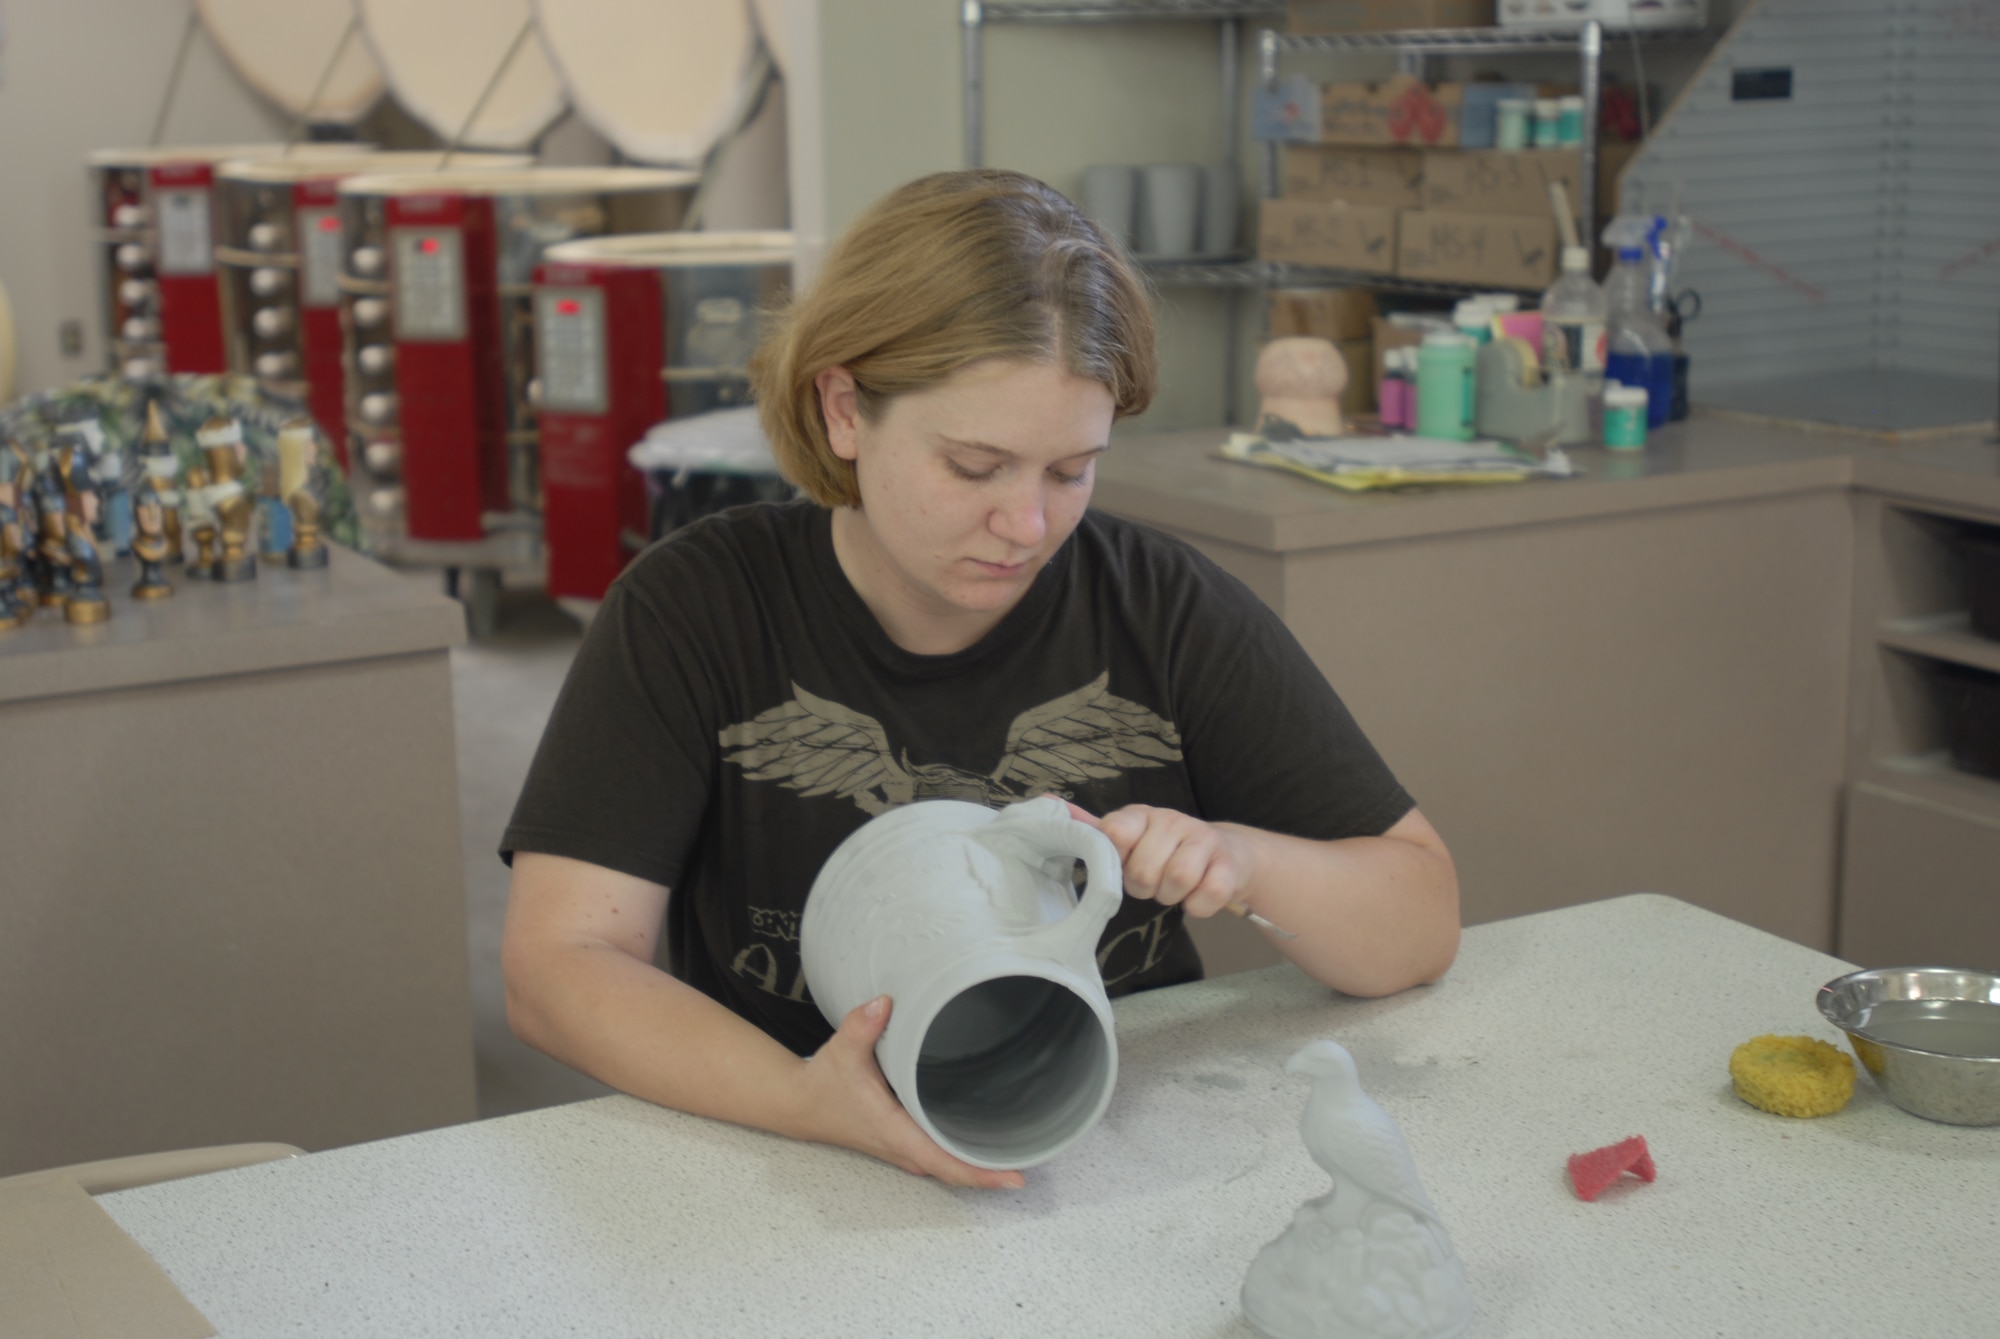 GOODFELLOW AIR FORCE BASE, Texas—Airman 1st Class Jessica Keith, 17th Training Wing Public Affairs, prepares a ceramic stein, a decorative German beer mug, for firing May 21. Firing is the one of the first steps when preparing a ceramic for painting. (U.S. Air Force photo) 